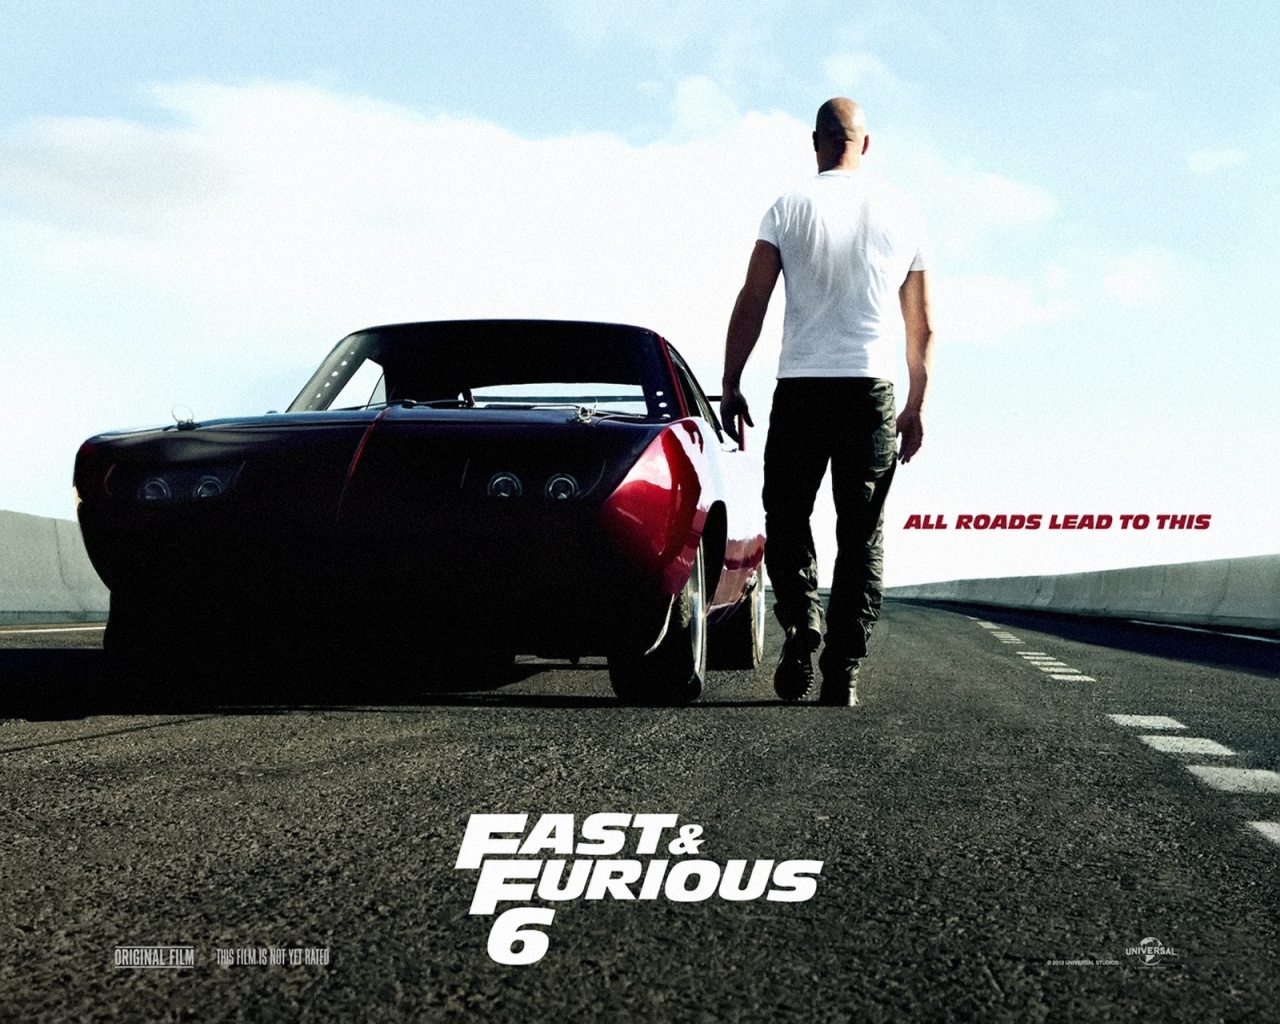 Fast & Furious 6 Movie Poster desktop PC and Mac wallpaper